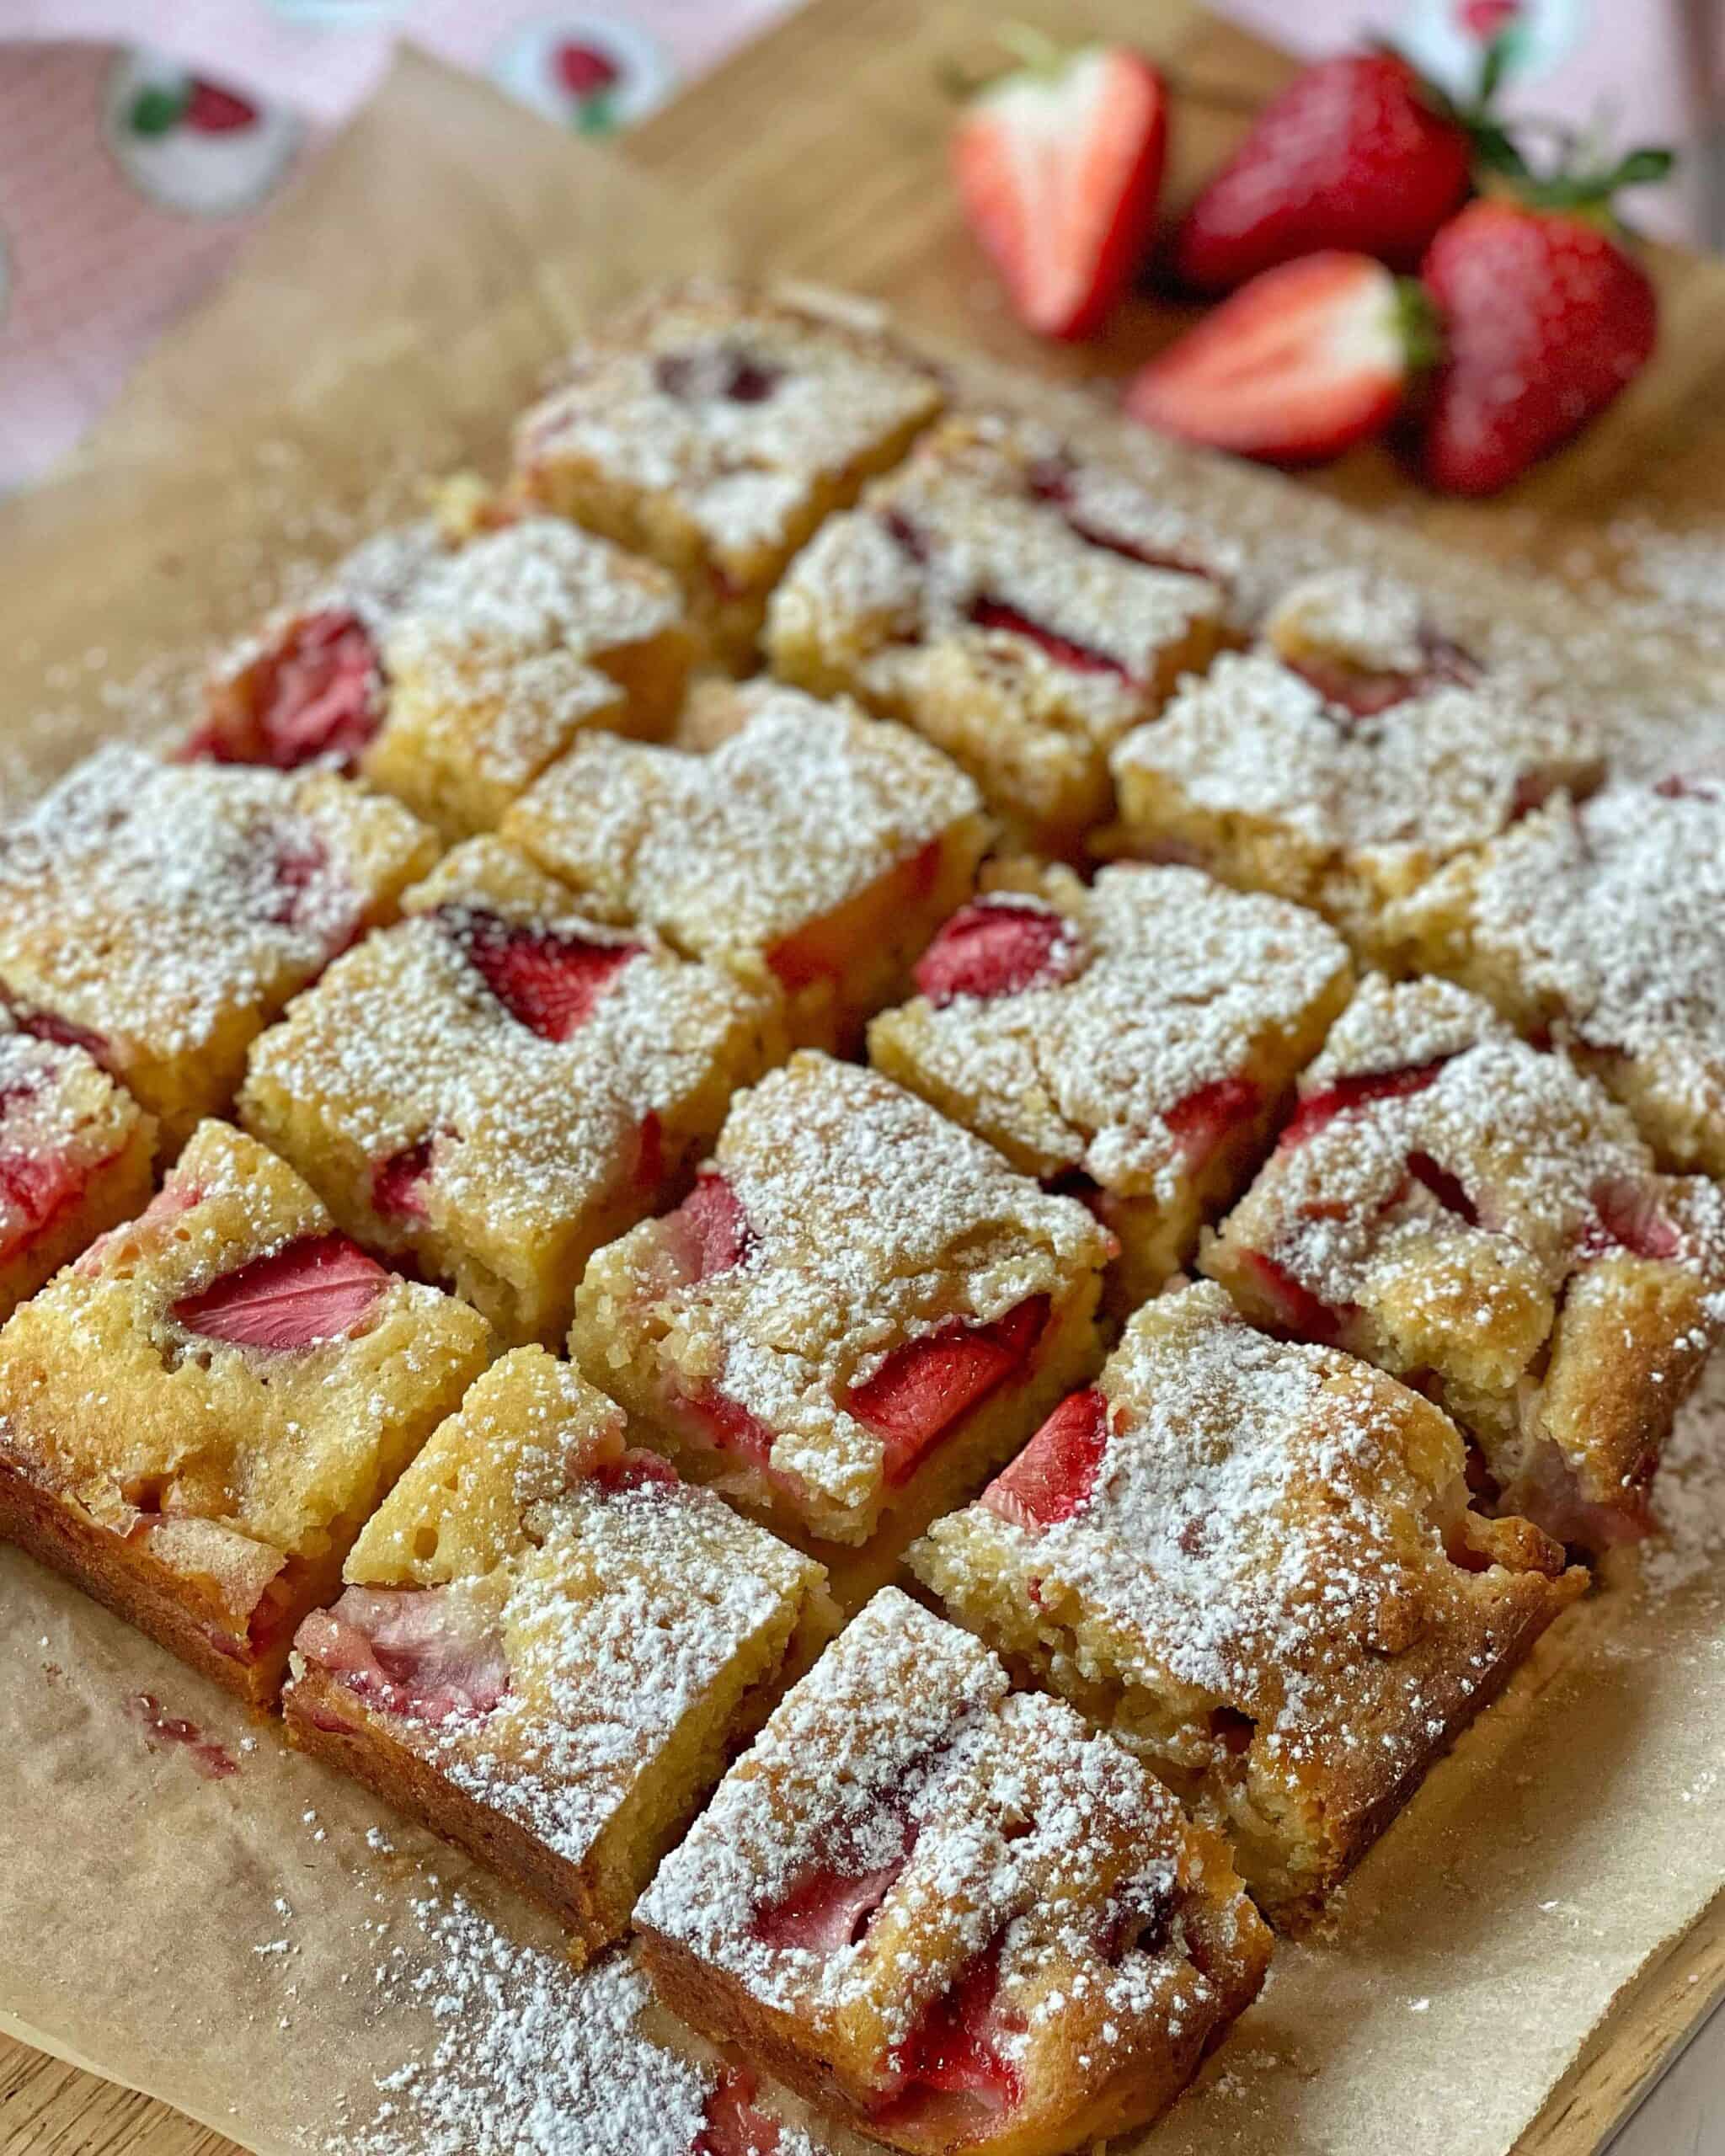 Cooked, sliced White Chocolate and Strawberry Blondie, dusted with icing sugar on baking paper on a chopping board.